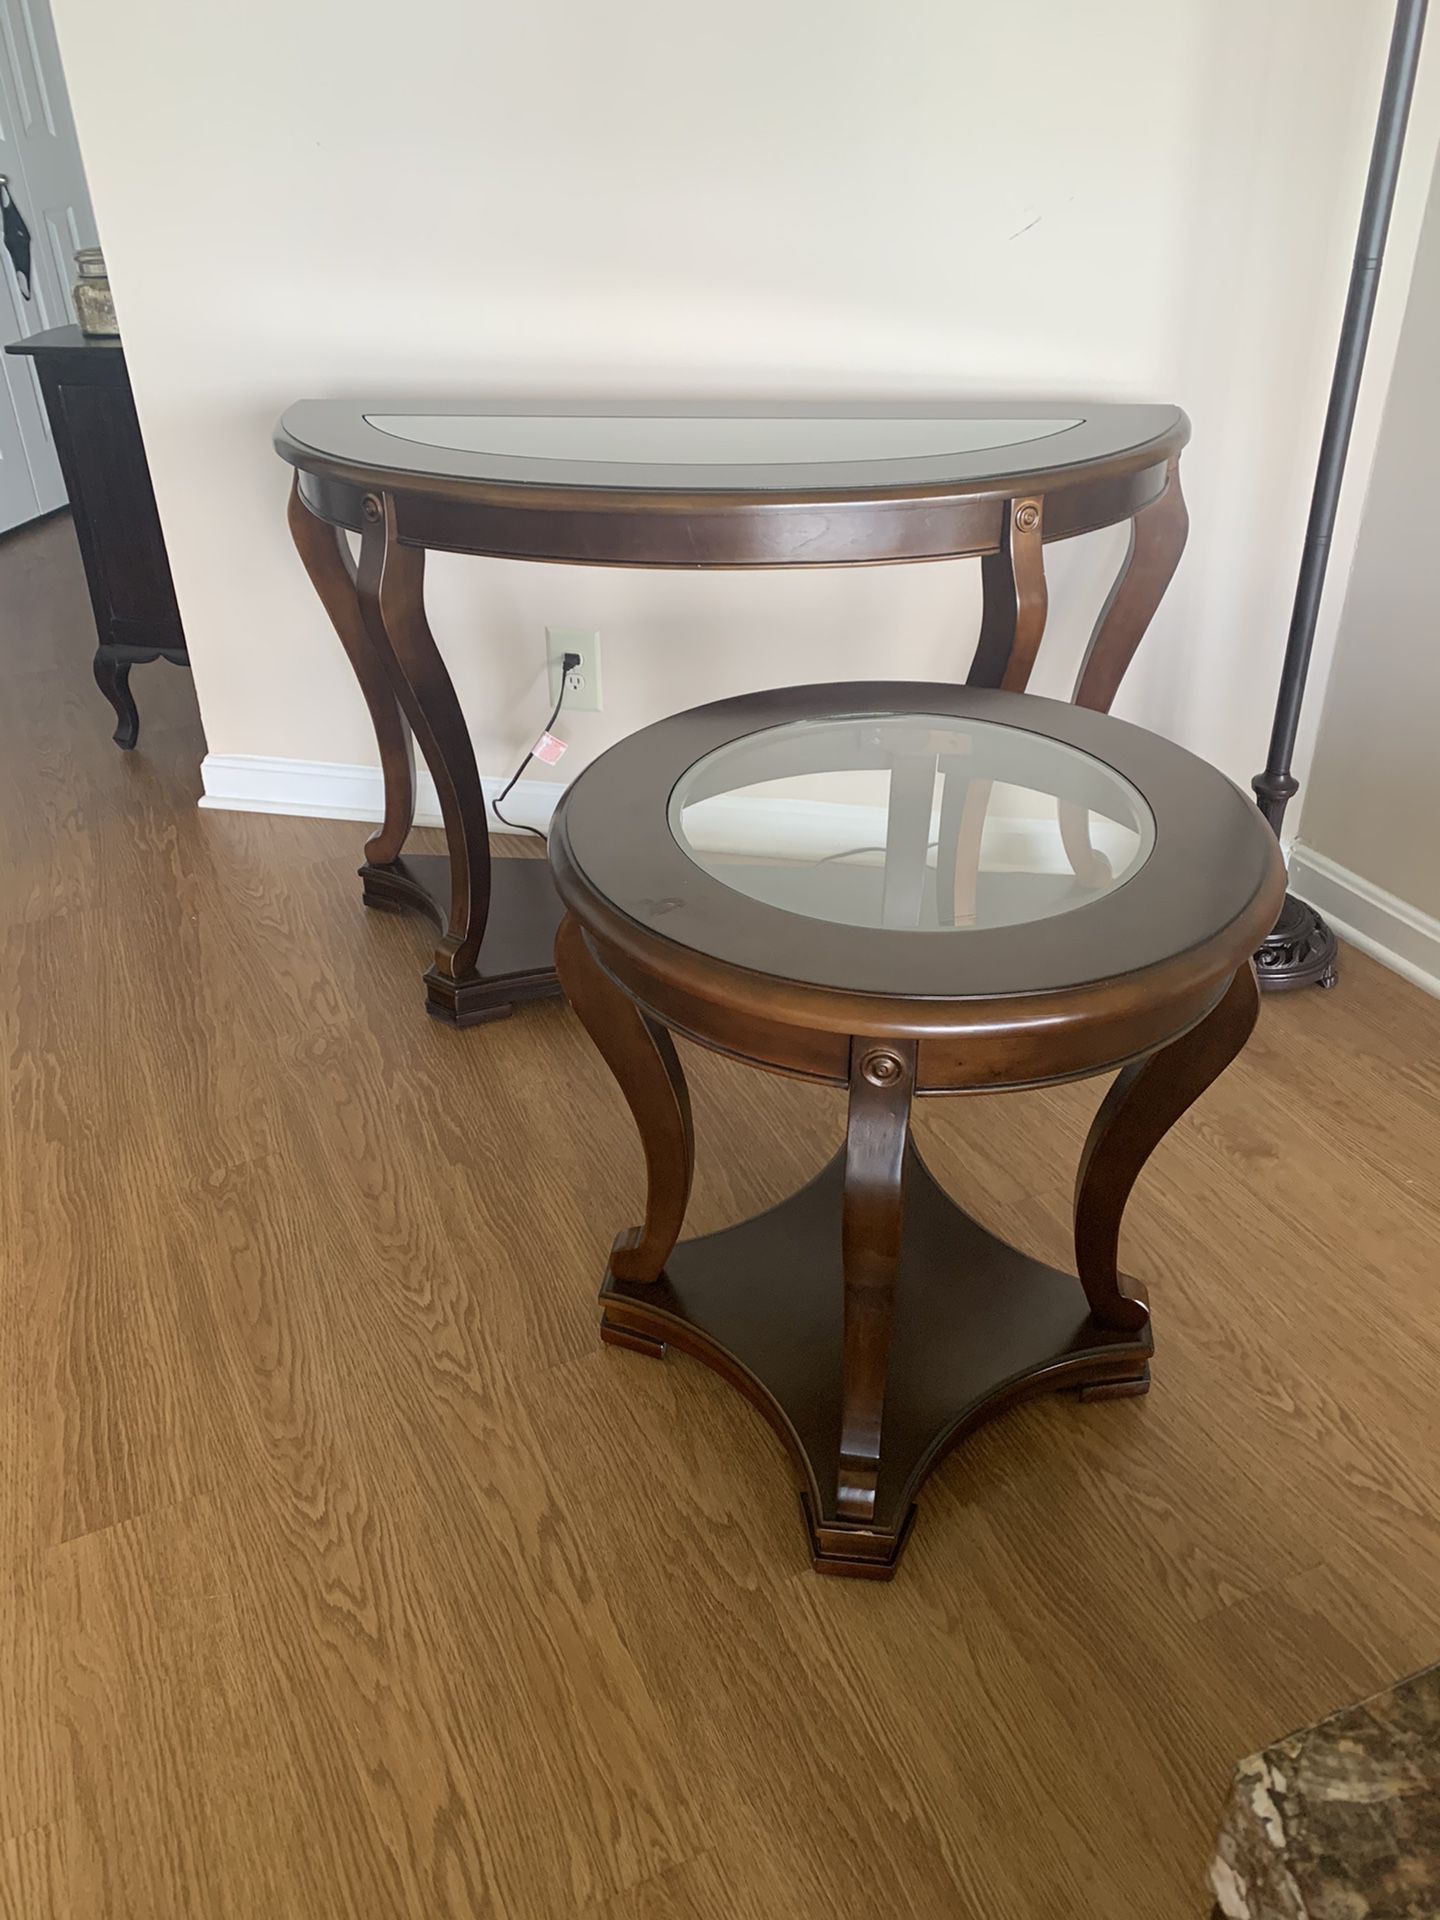 2 Wood & Glass Tables for Sale